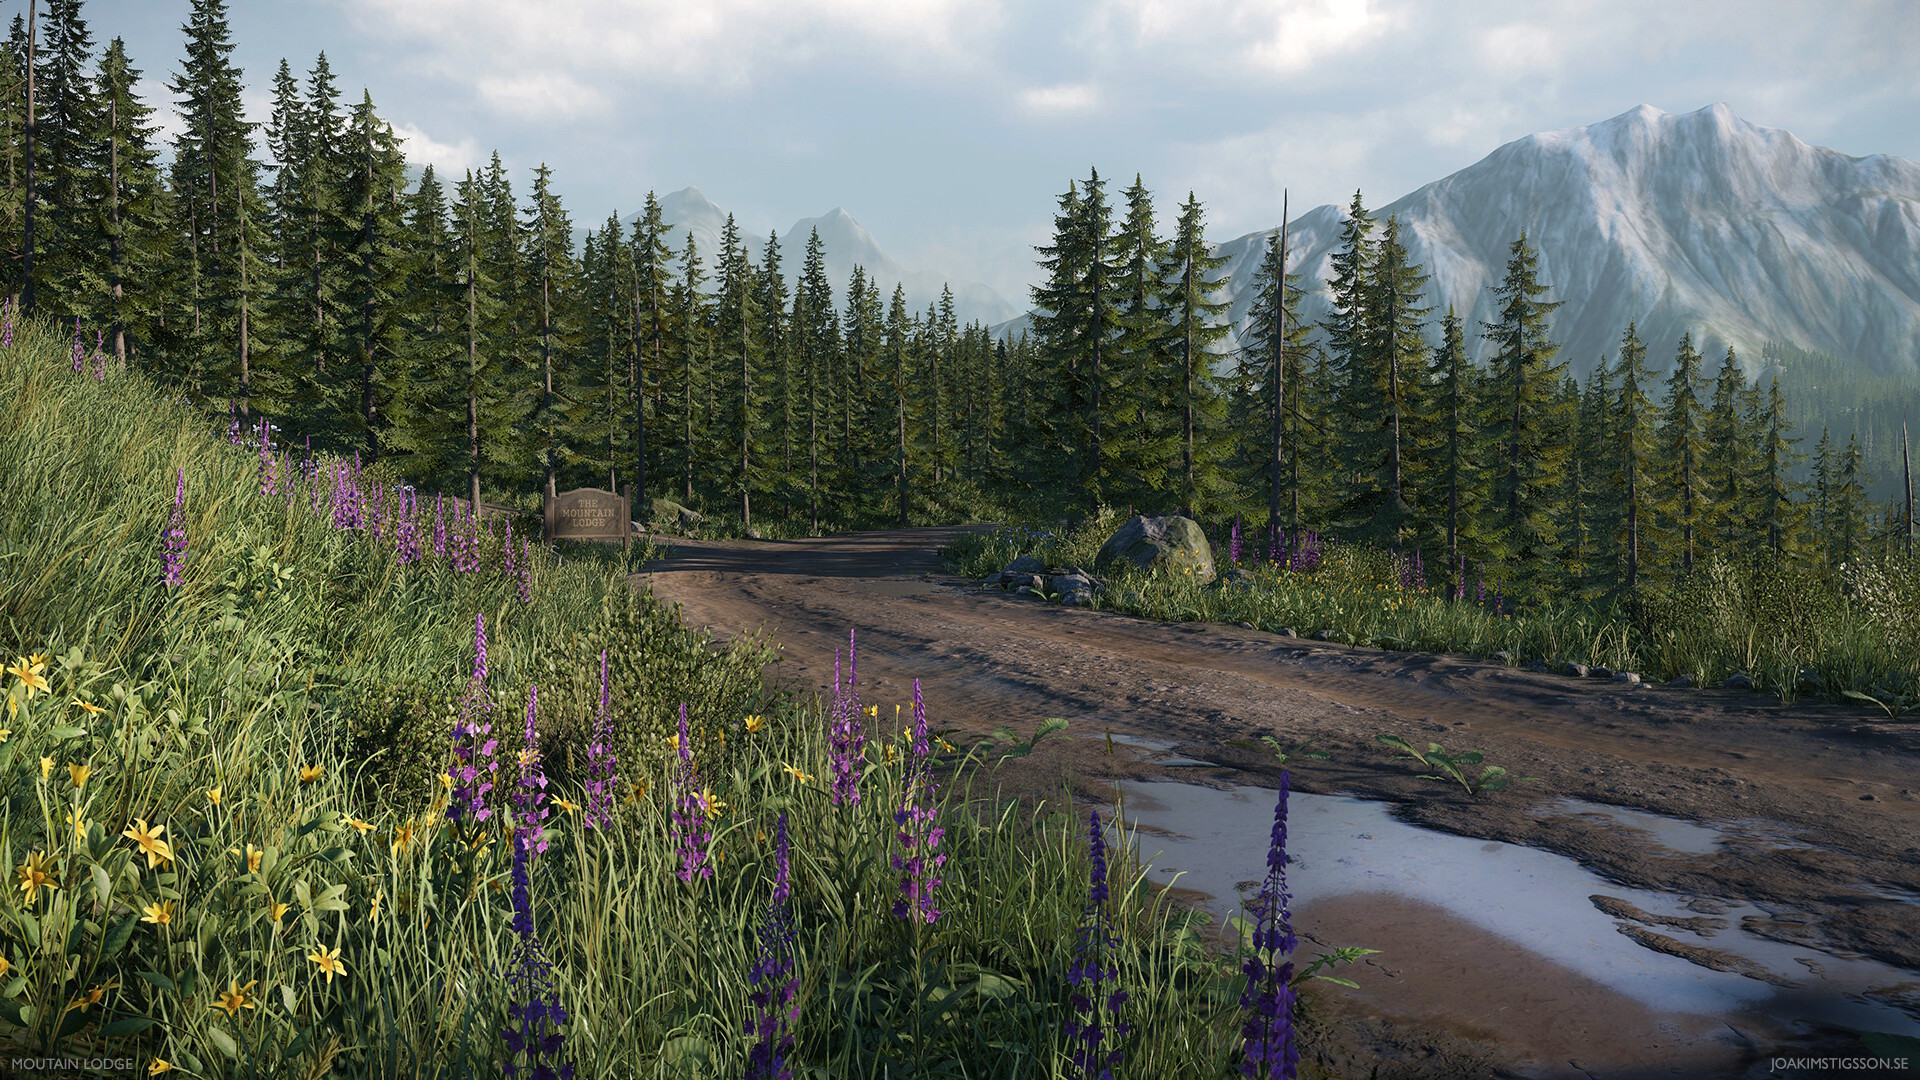 Custom CryEngine 3 Environments Are The Best